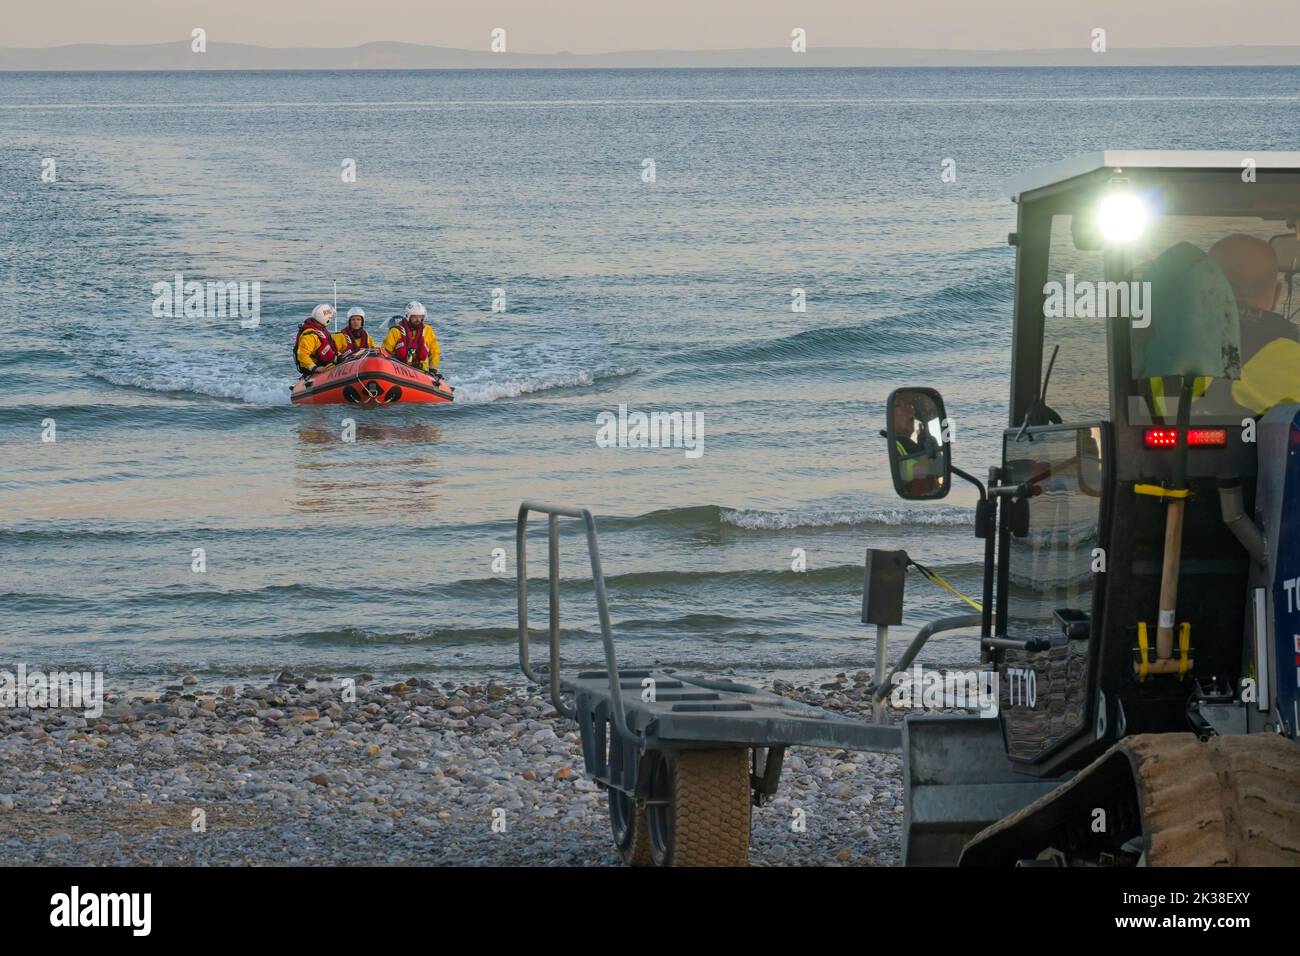 Horton Gower Wales UK RNLI Inshore Lifeboat returning to Lifeboat Station after exercise Beach recovery vehicle and crew assisting in shallow waters. Stock Photo